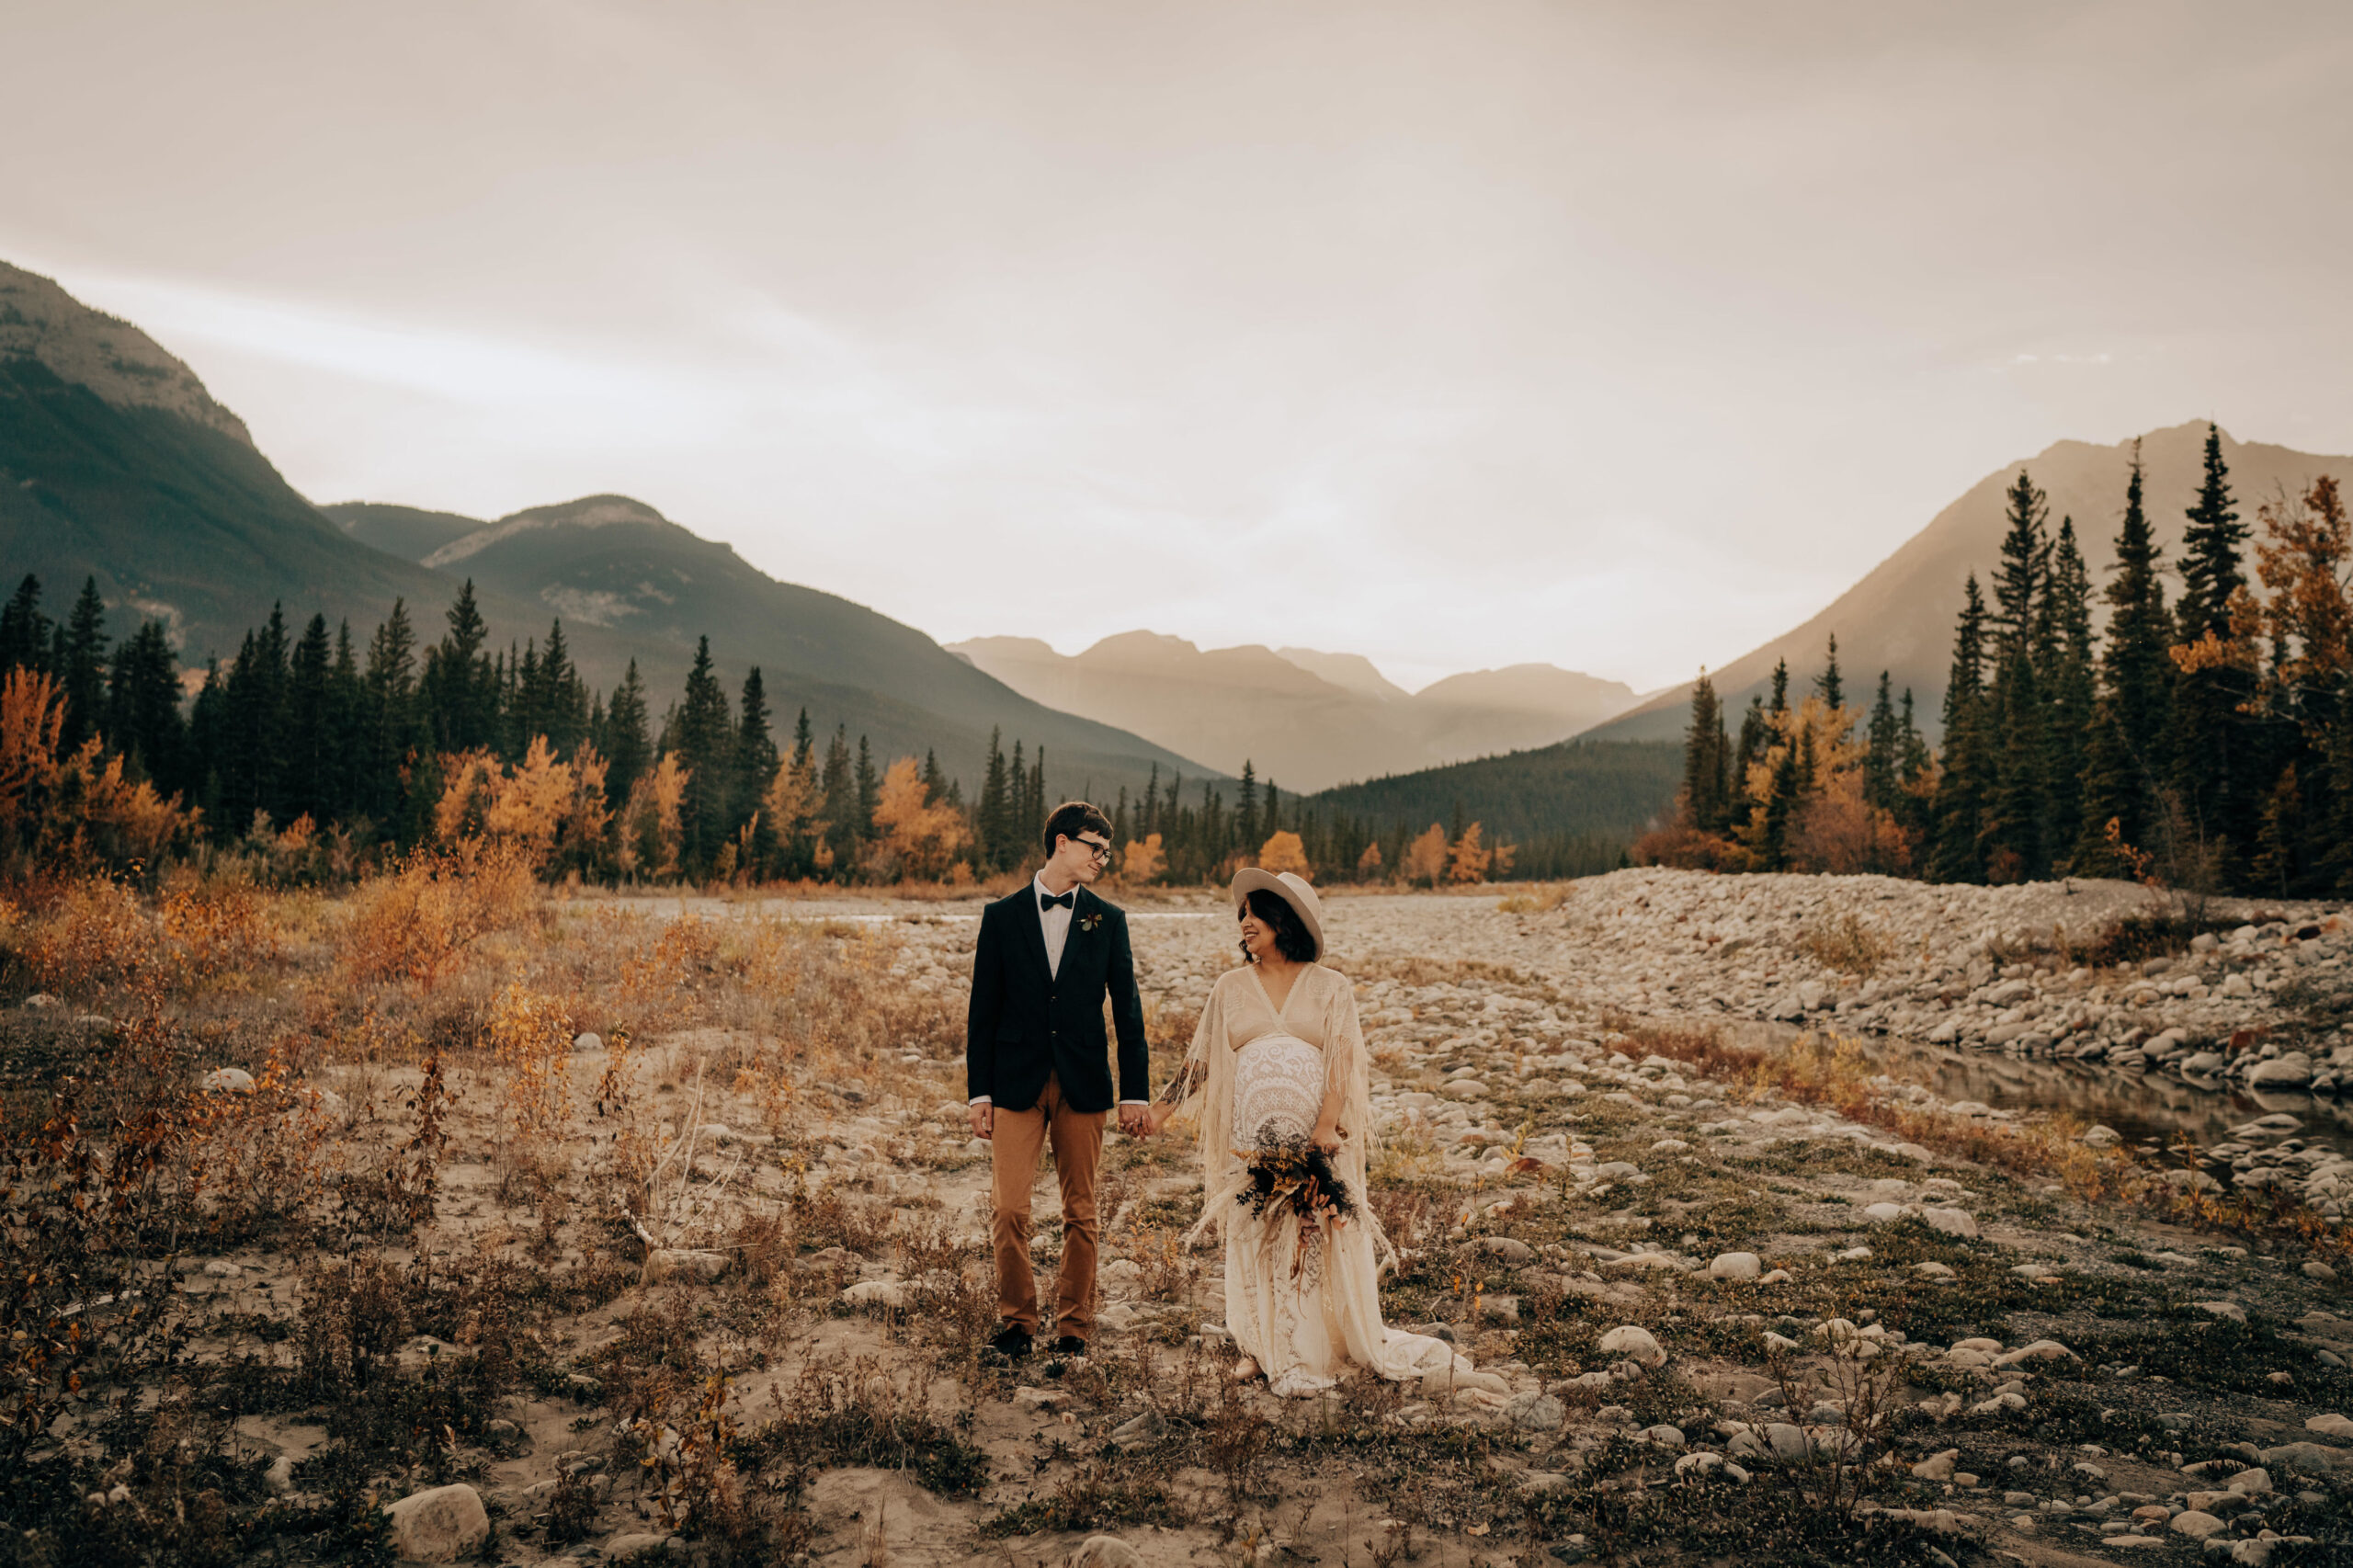 Boho bride and boho groom standing in valley, holding hands and looking at each other